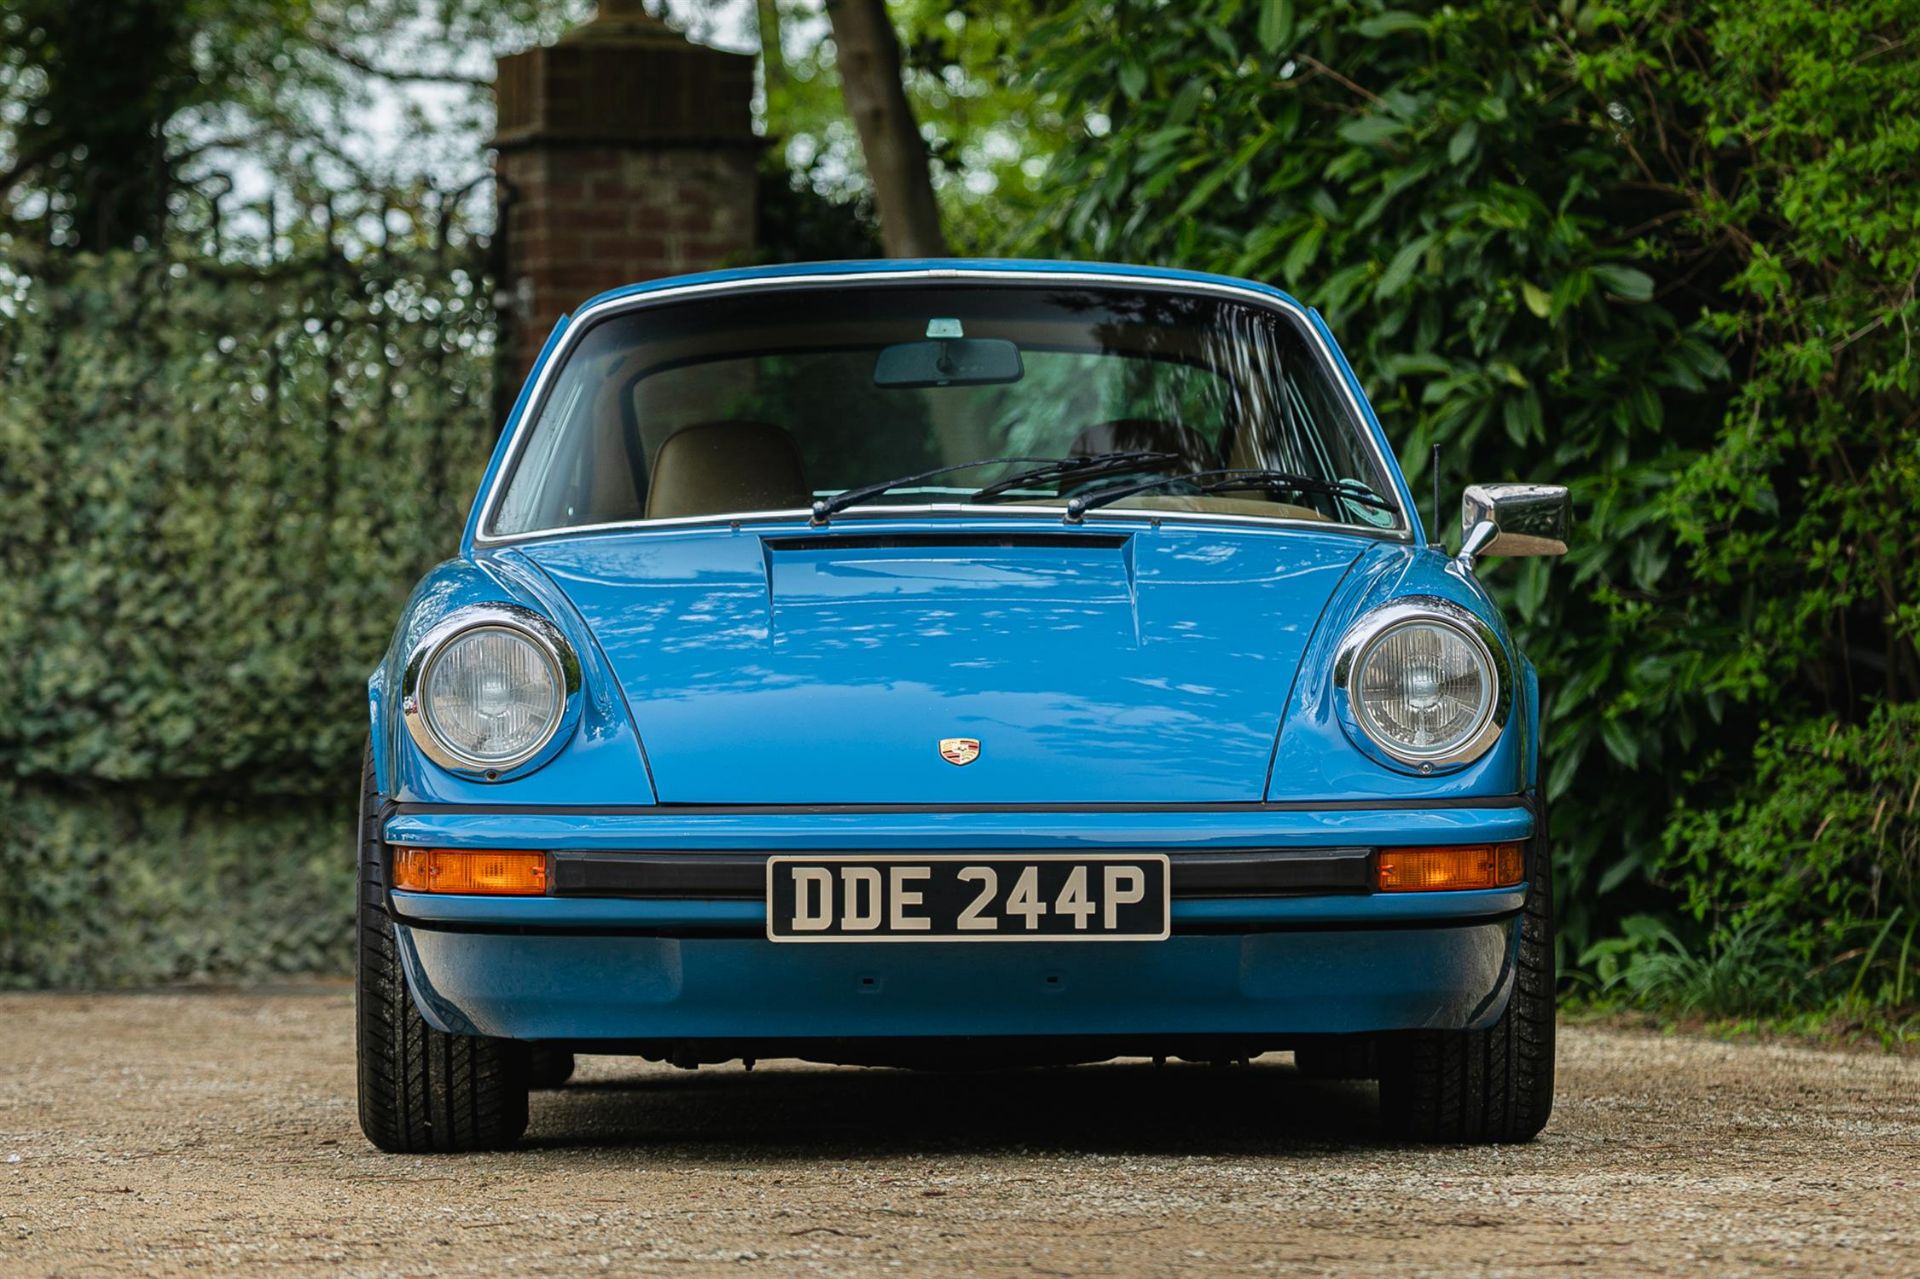 **Sold Pre-Sale**1976 Porsche 912E - Offered Directly From Mike Brewer - Image 6 of 10